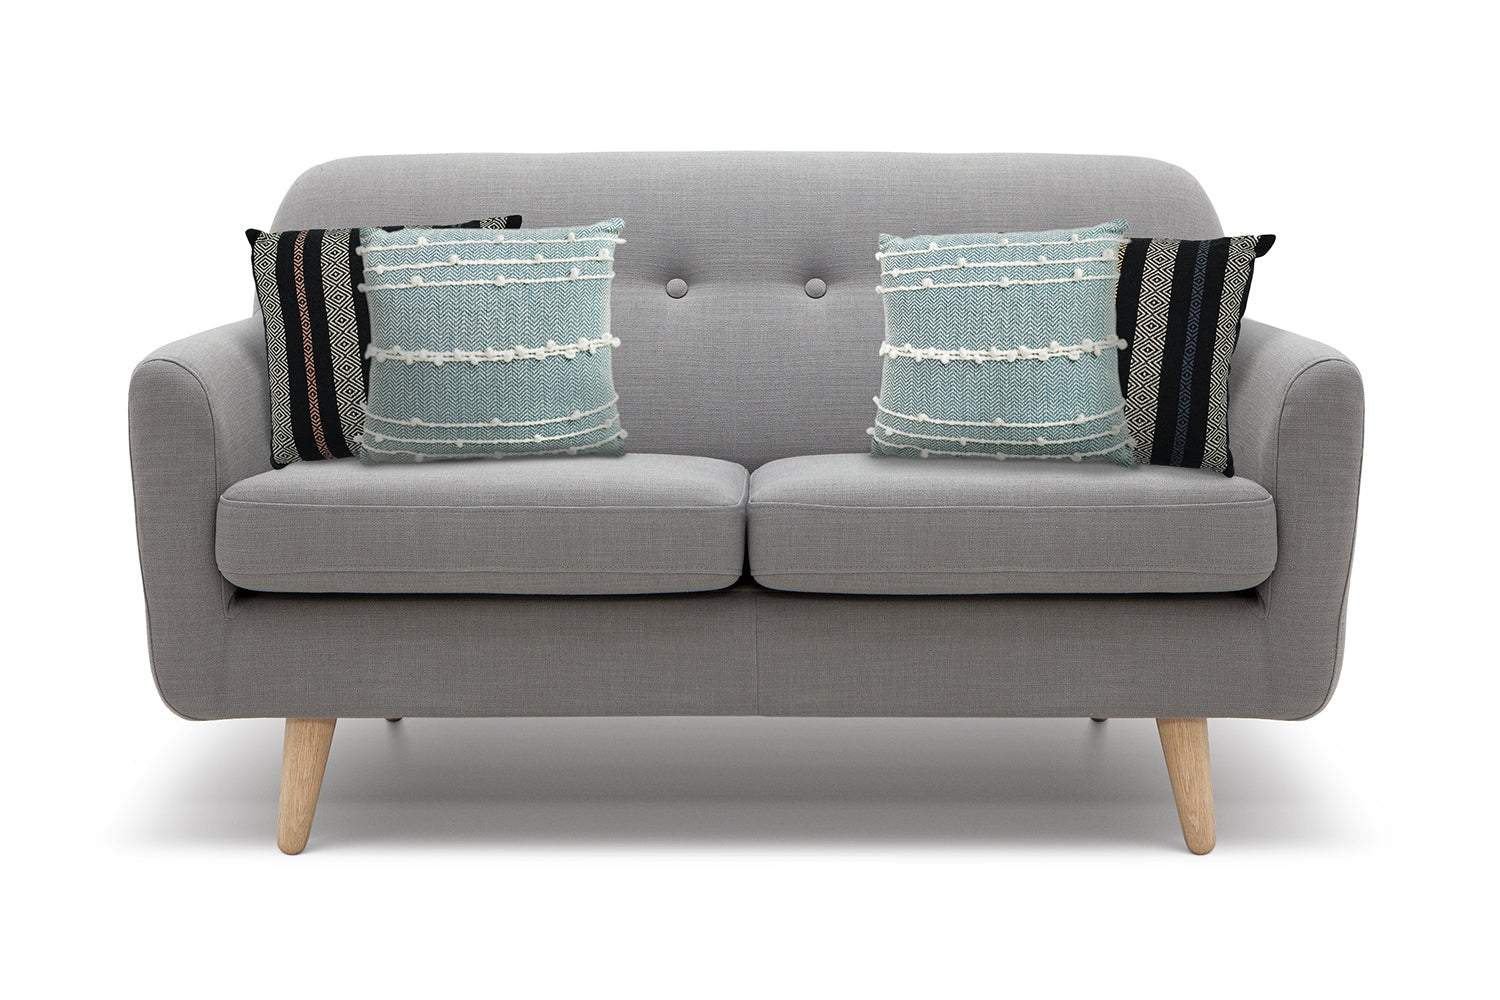 Grey loveseat with four pillows two in either corner